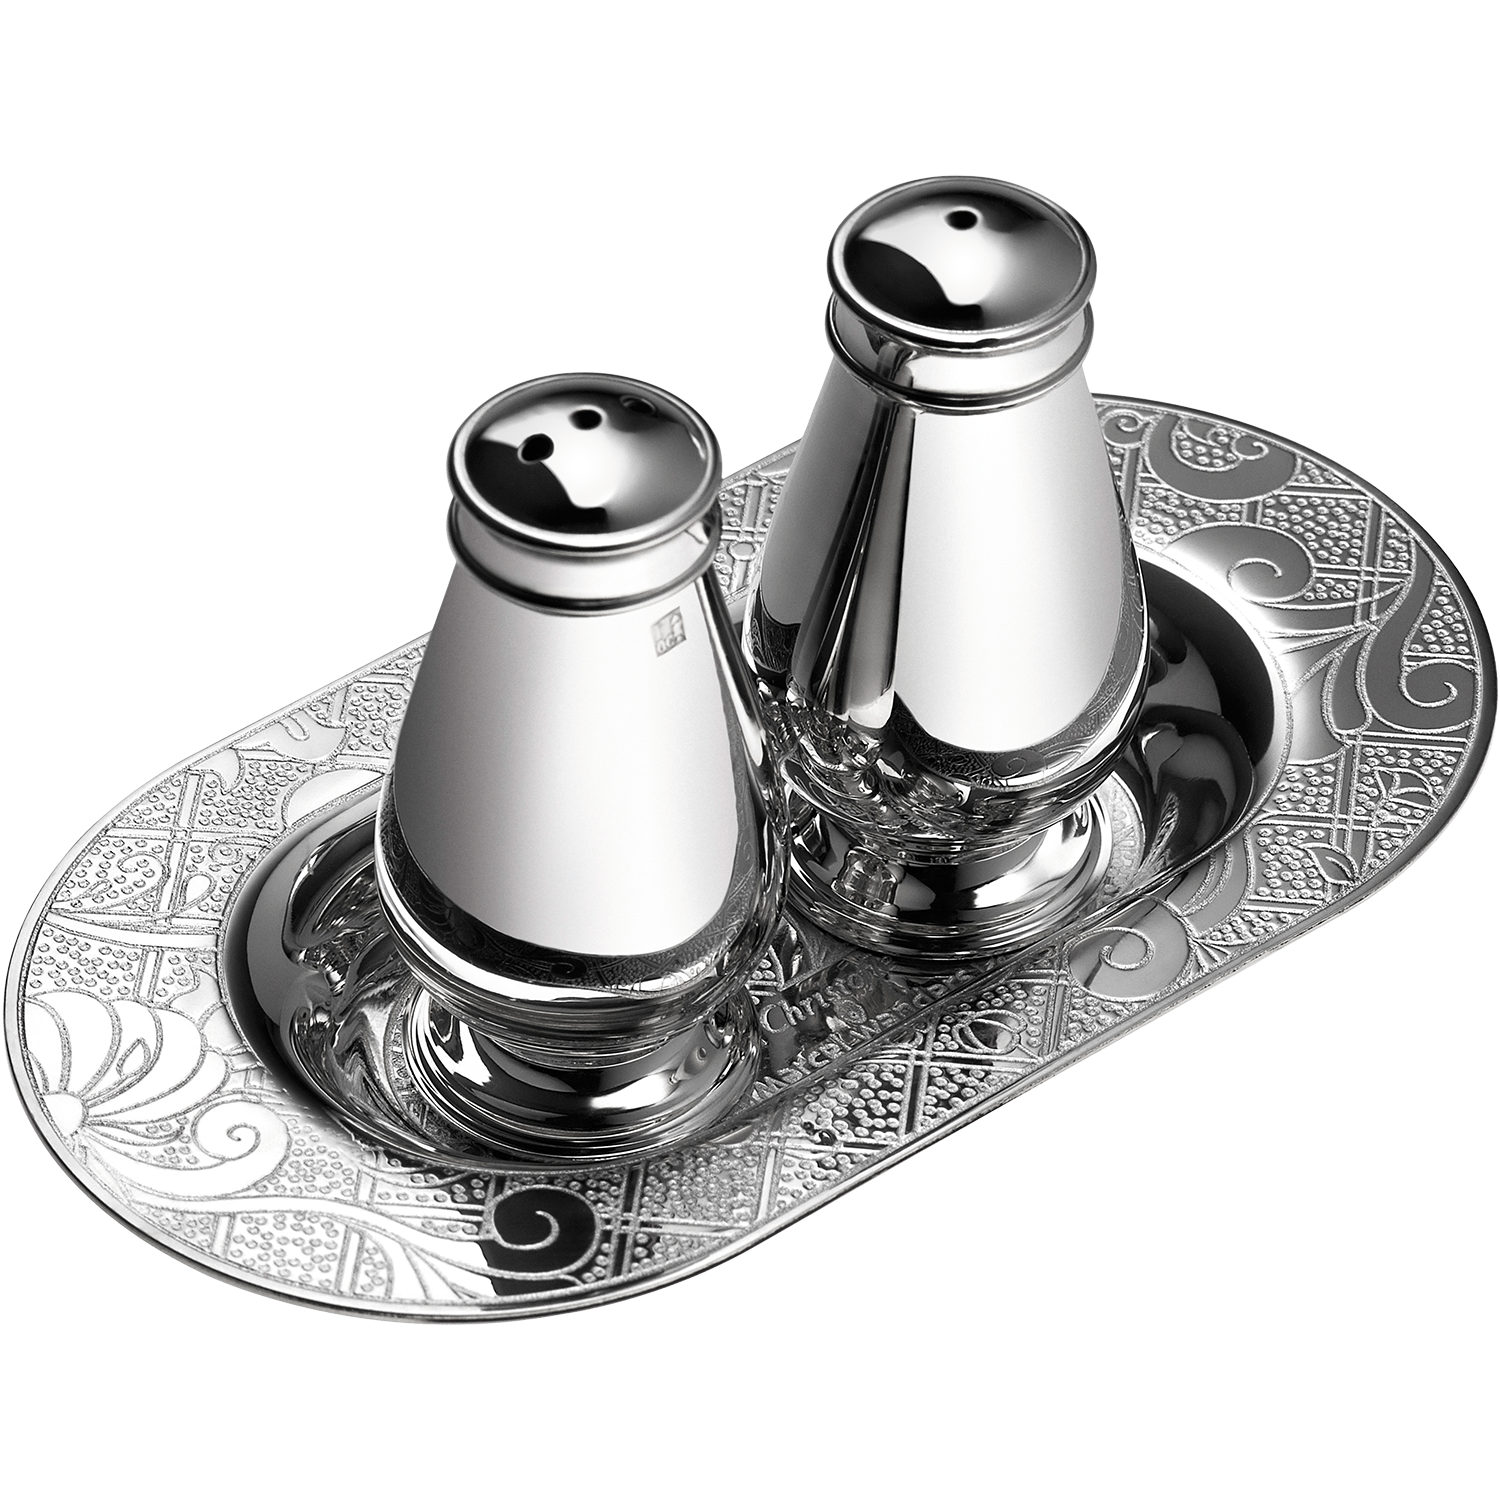 Silver-Plated salt & pepper shakers with tray